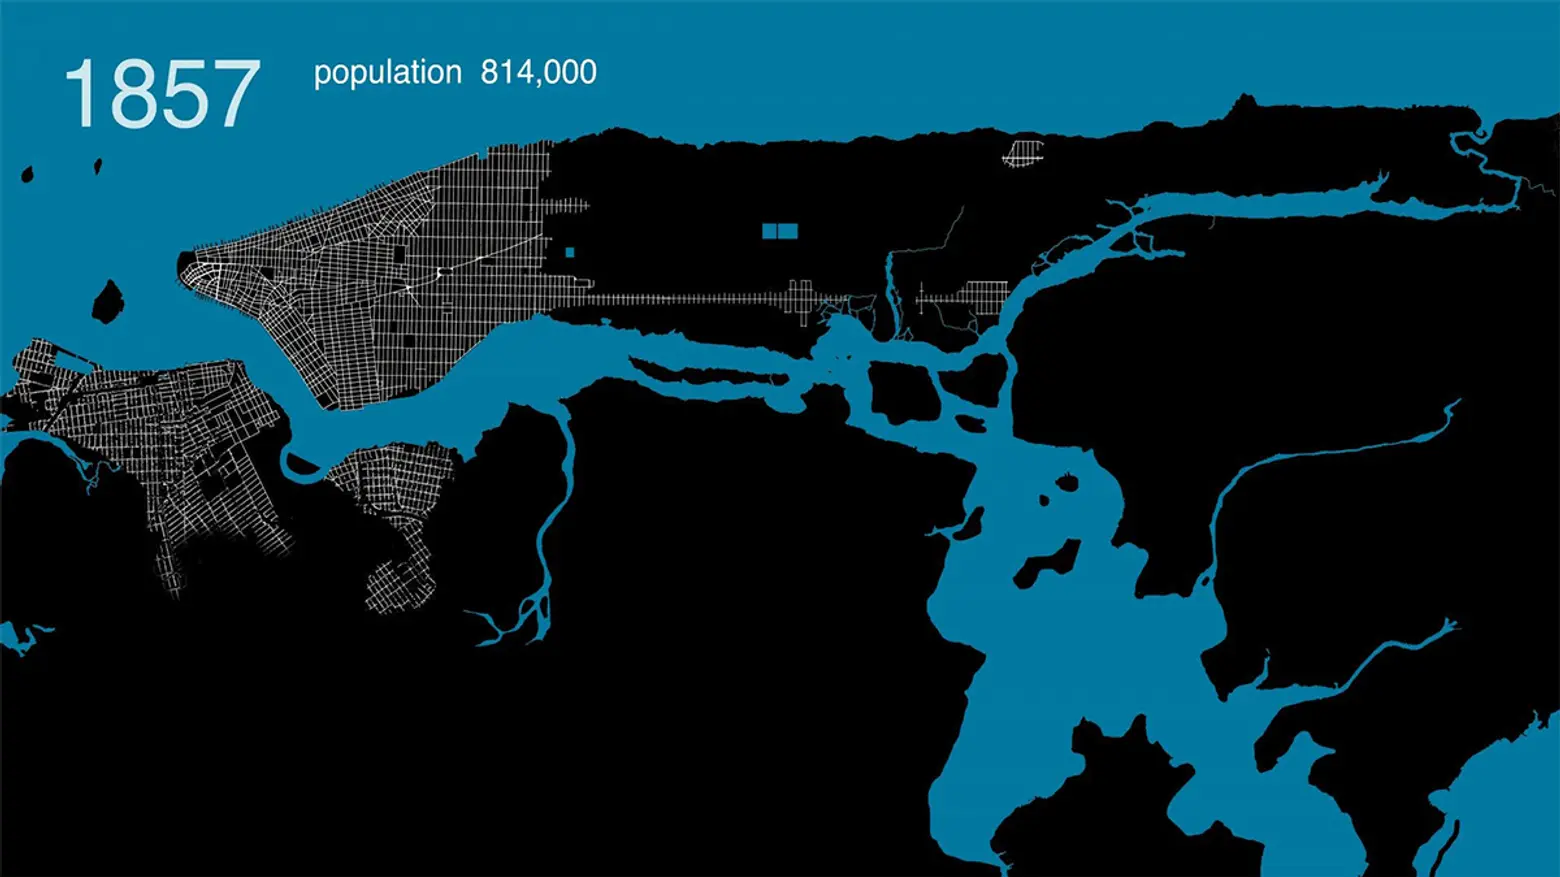 Watch New York City grow from 1609 to today with this animated video assembled from historic maps